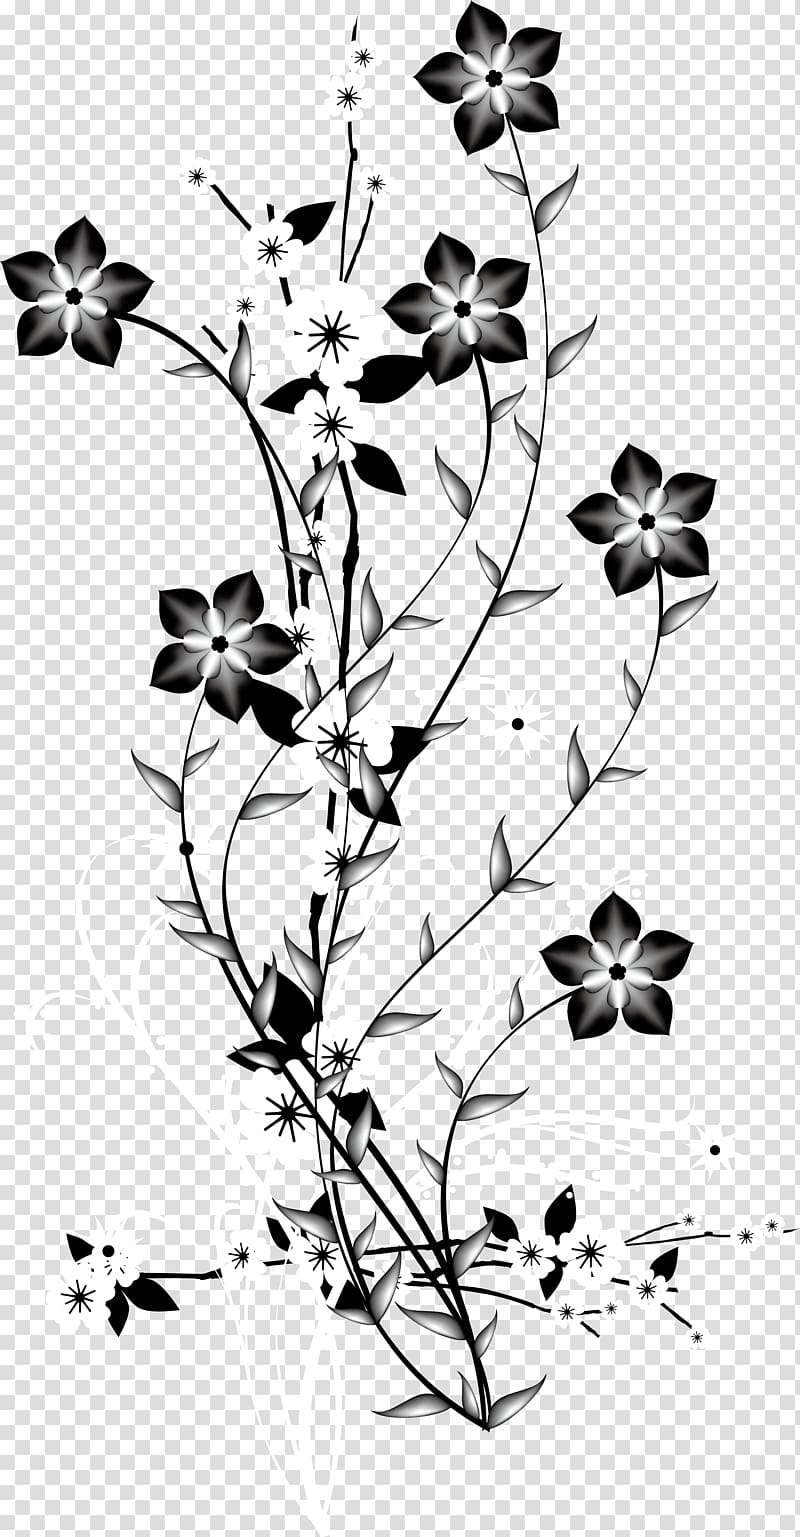 China Japan Flower Euclidean , Black and white decorative background flowers branch, black, gray, and white flowers illustration transparent background PNG clipart